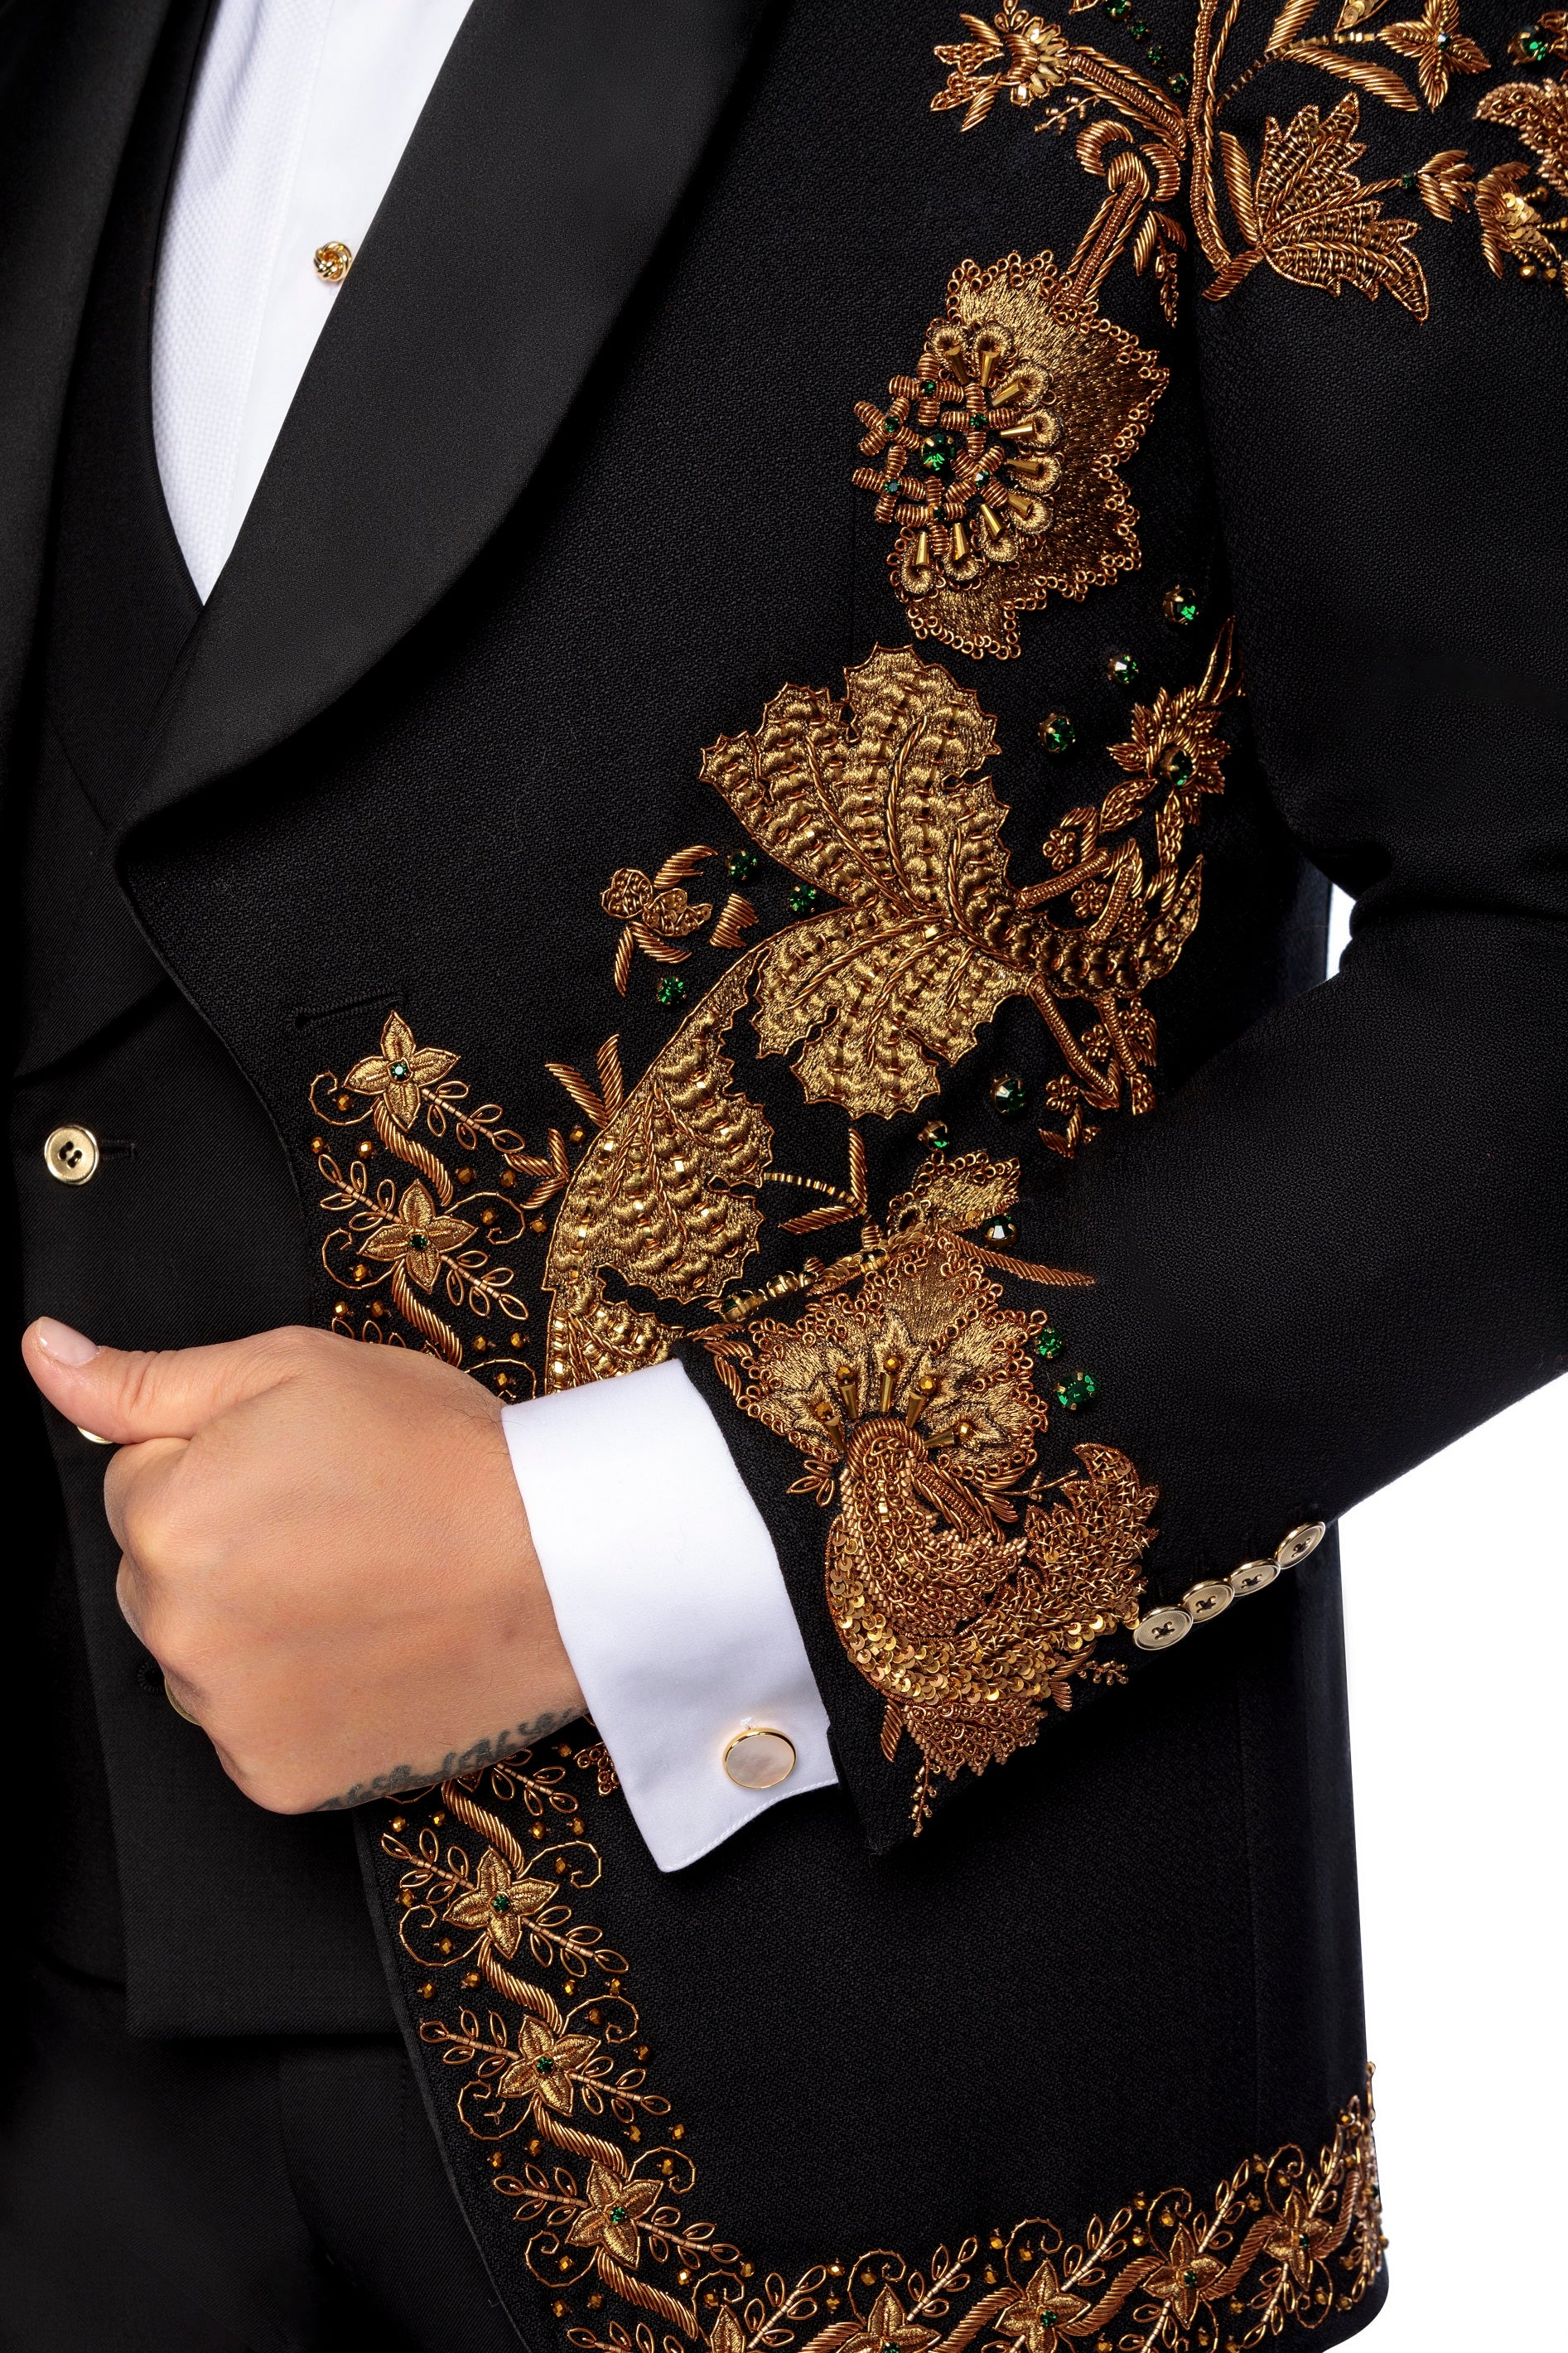 Wool tuxedo jacket with hand-embroidered bronze, sal lapel